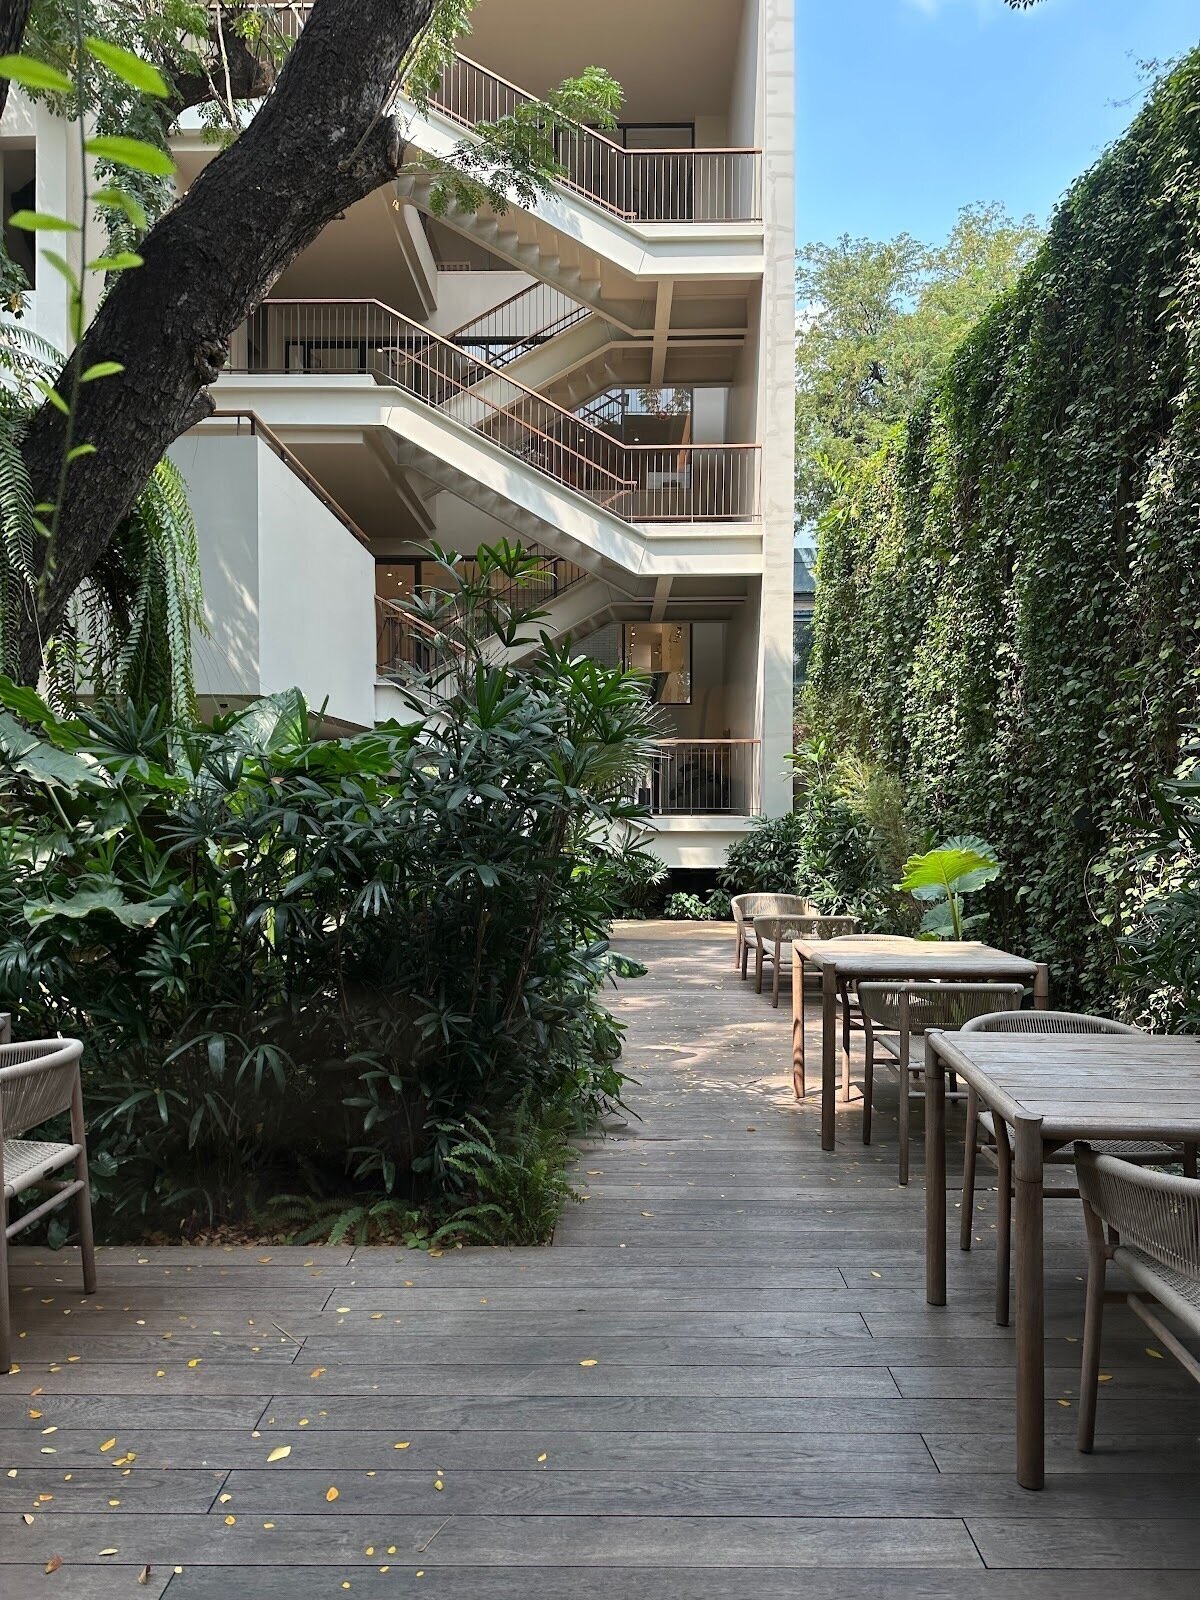 <span class="translation_missing" title="translation missing: en.meta.location_title, location_name: Café Craft by CHANINTR, city: Bangkok">Location Title</span>